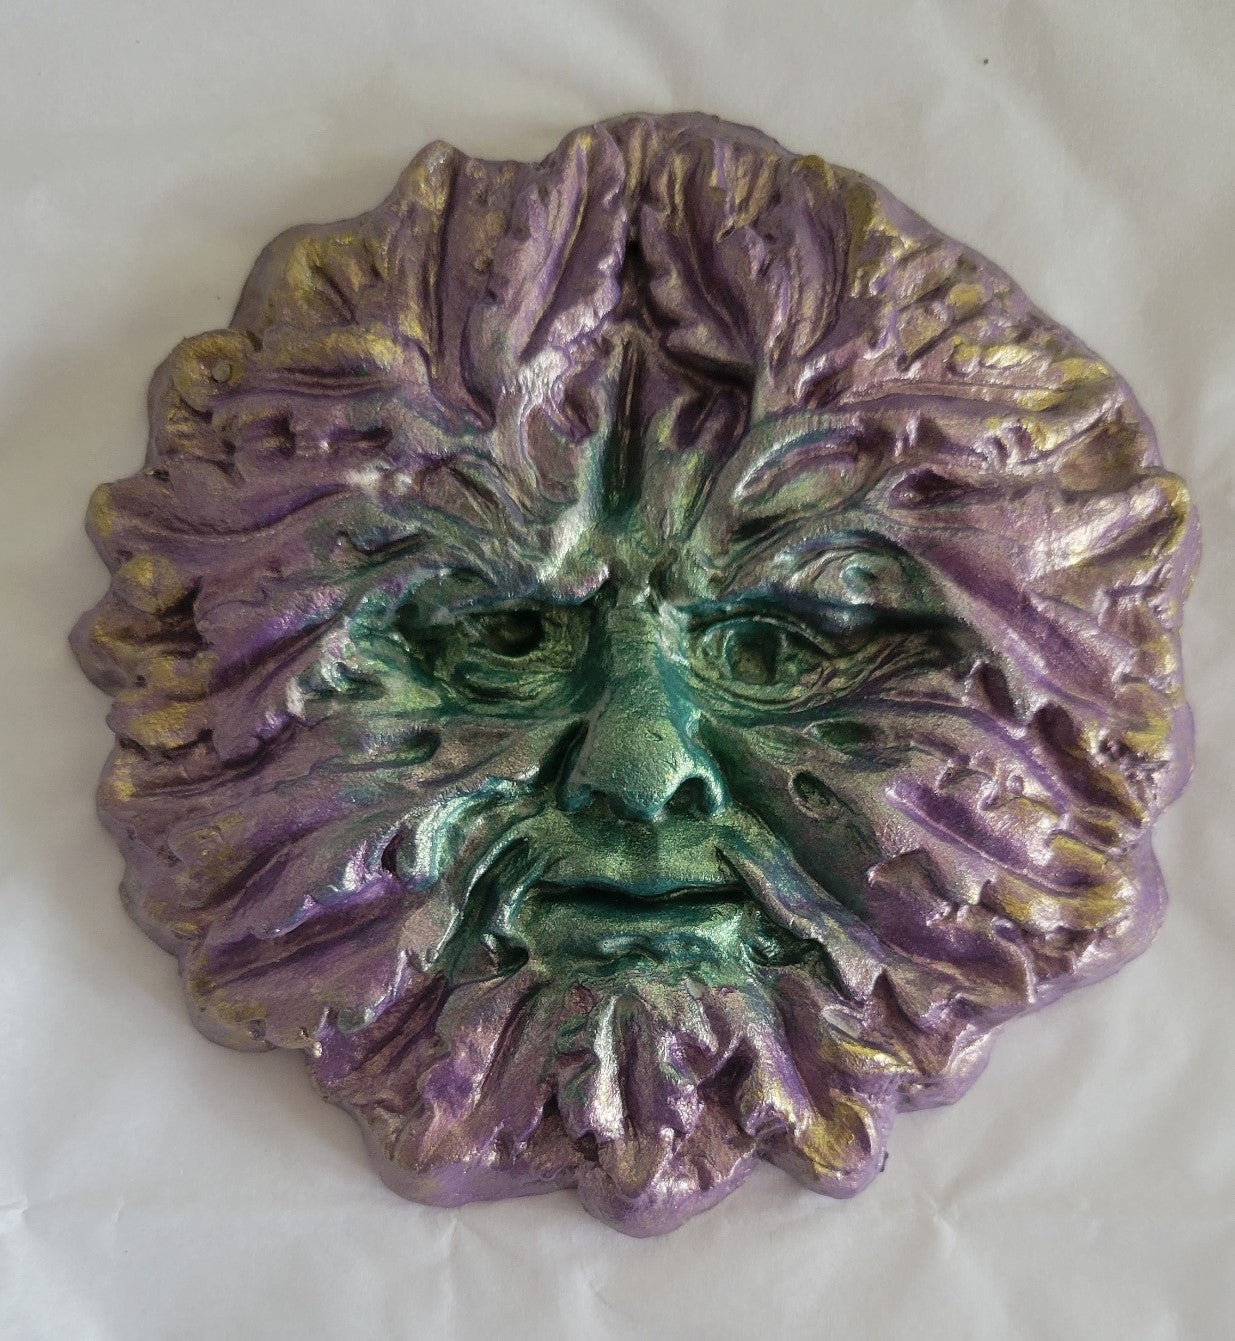 Greenman decoration, Medieval architecture, gifts for history lovers, handmade. Metallic green & purple